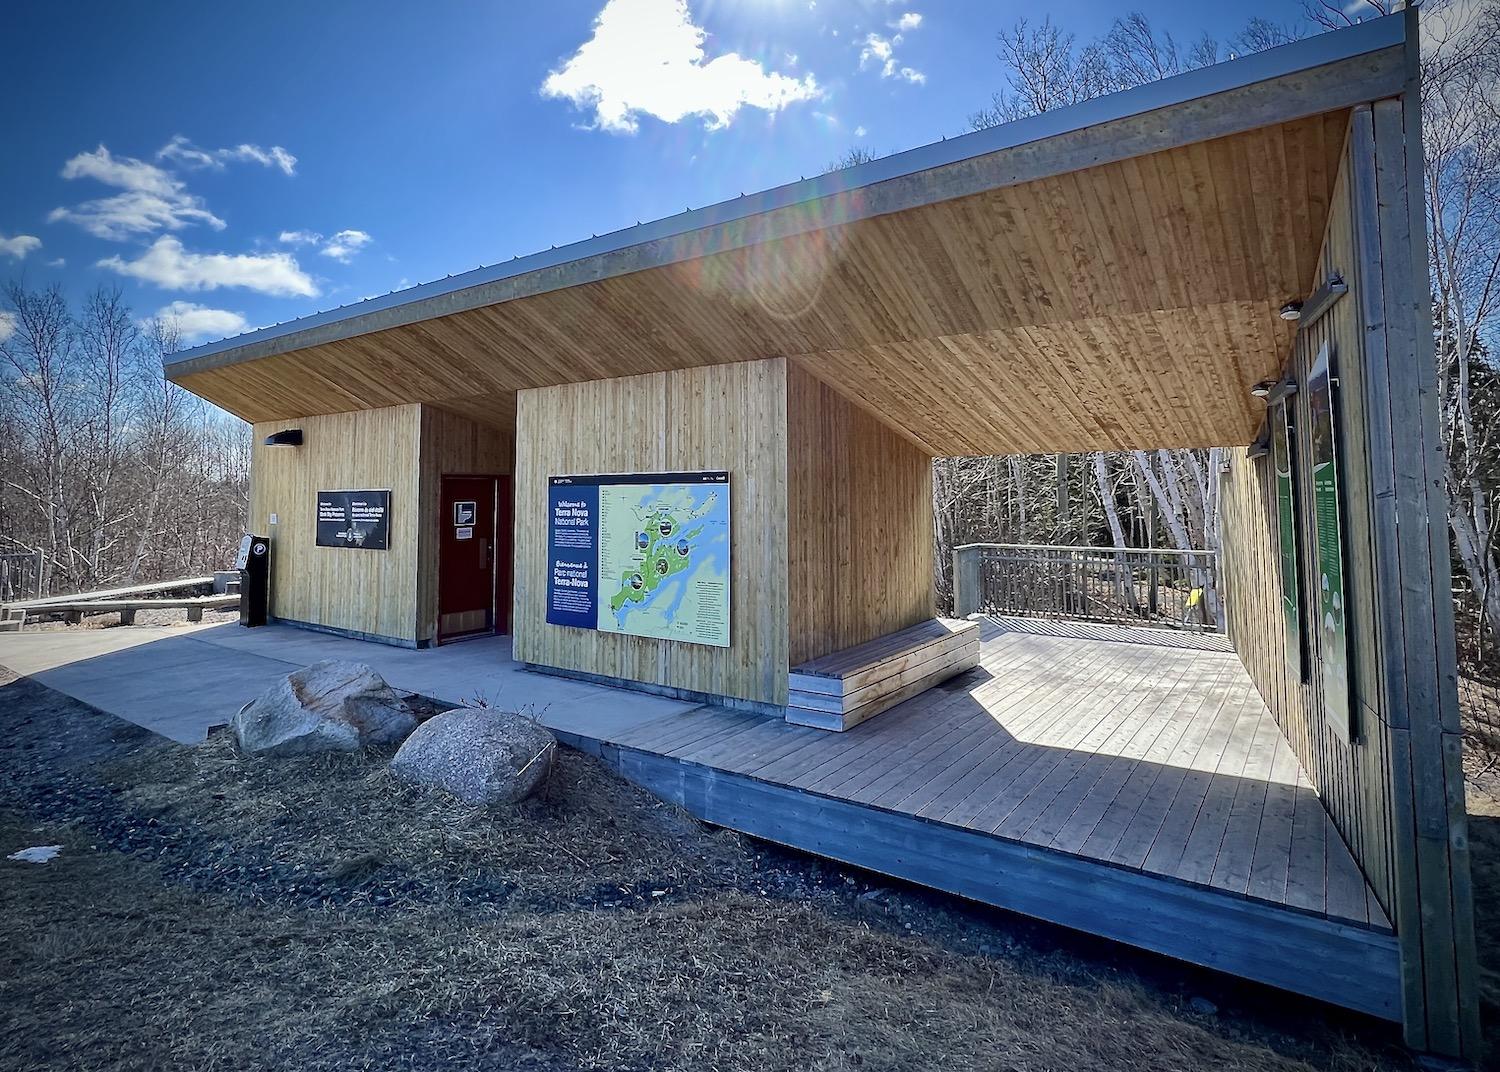 This roadside washroom in Terra Nova National Park is the gateway to the park's shortest hiking trail.